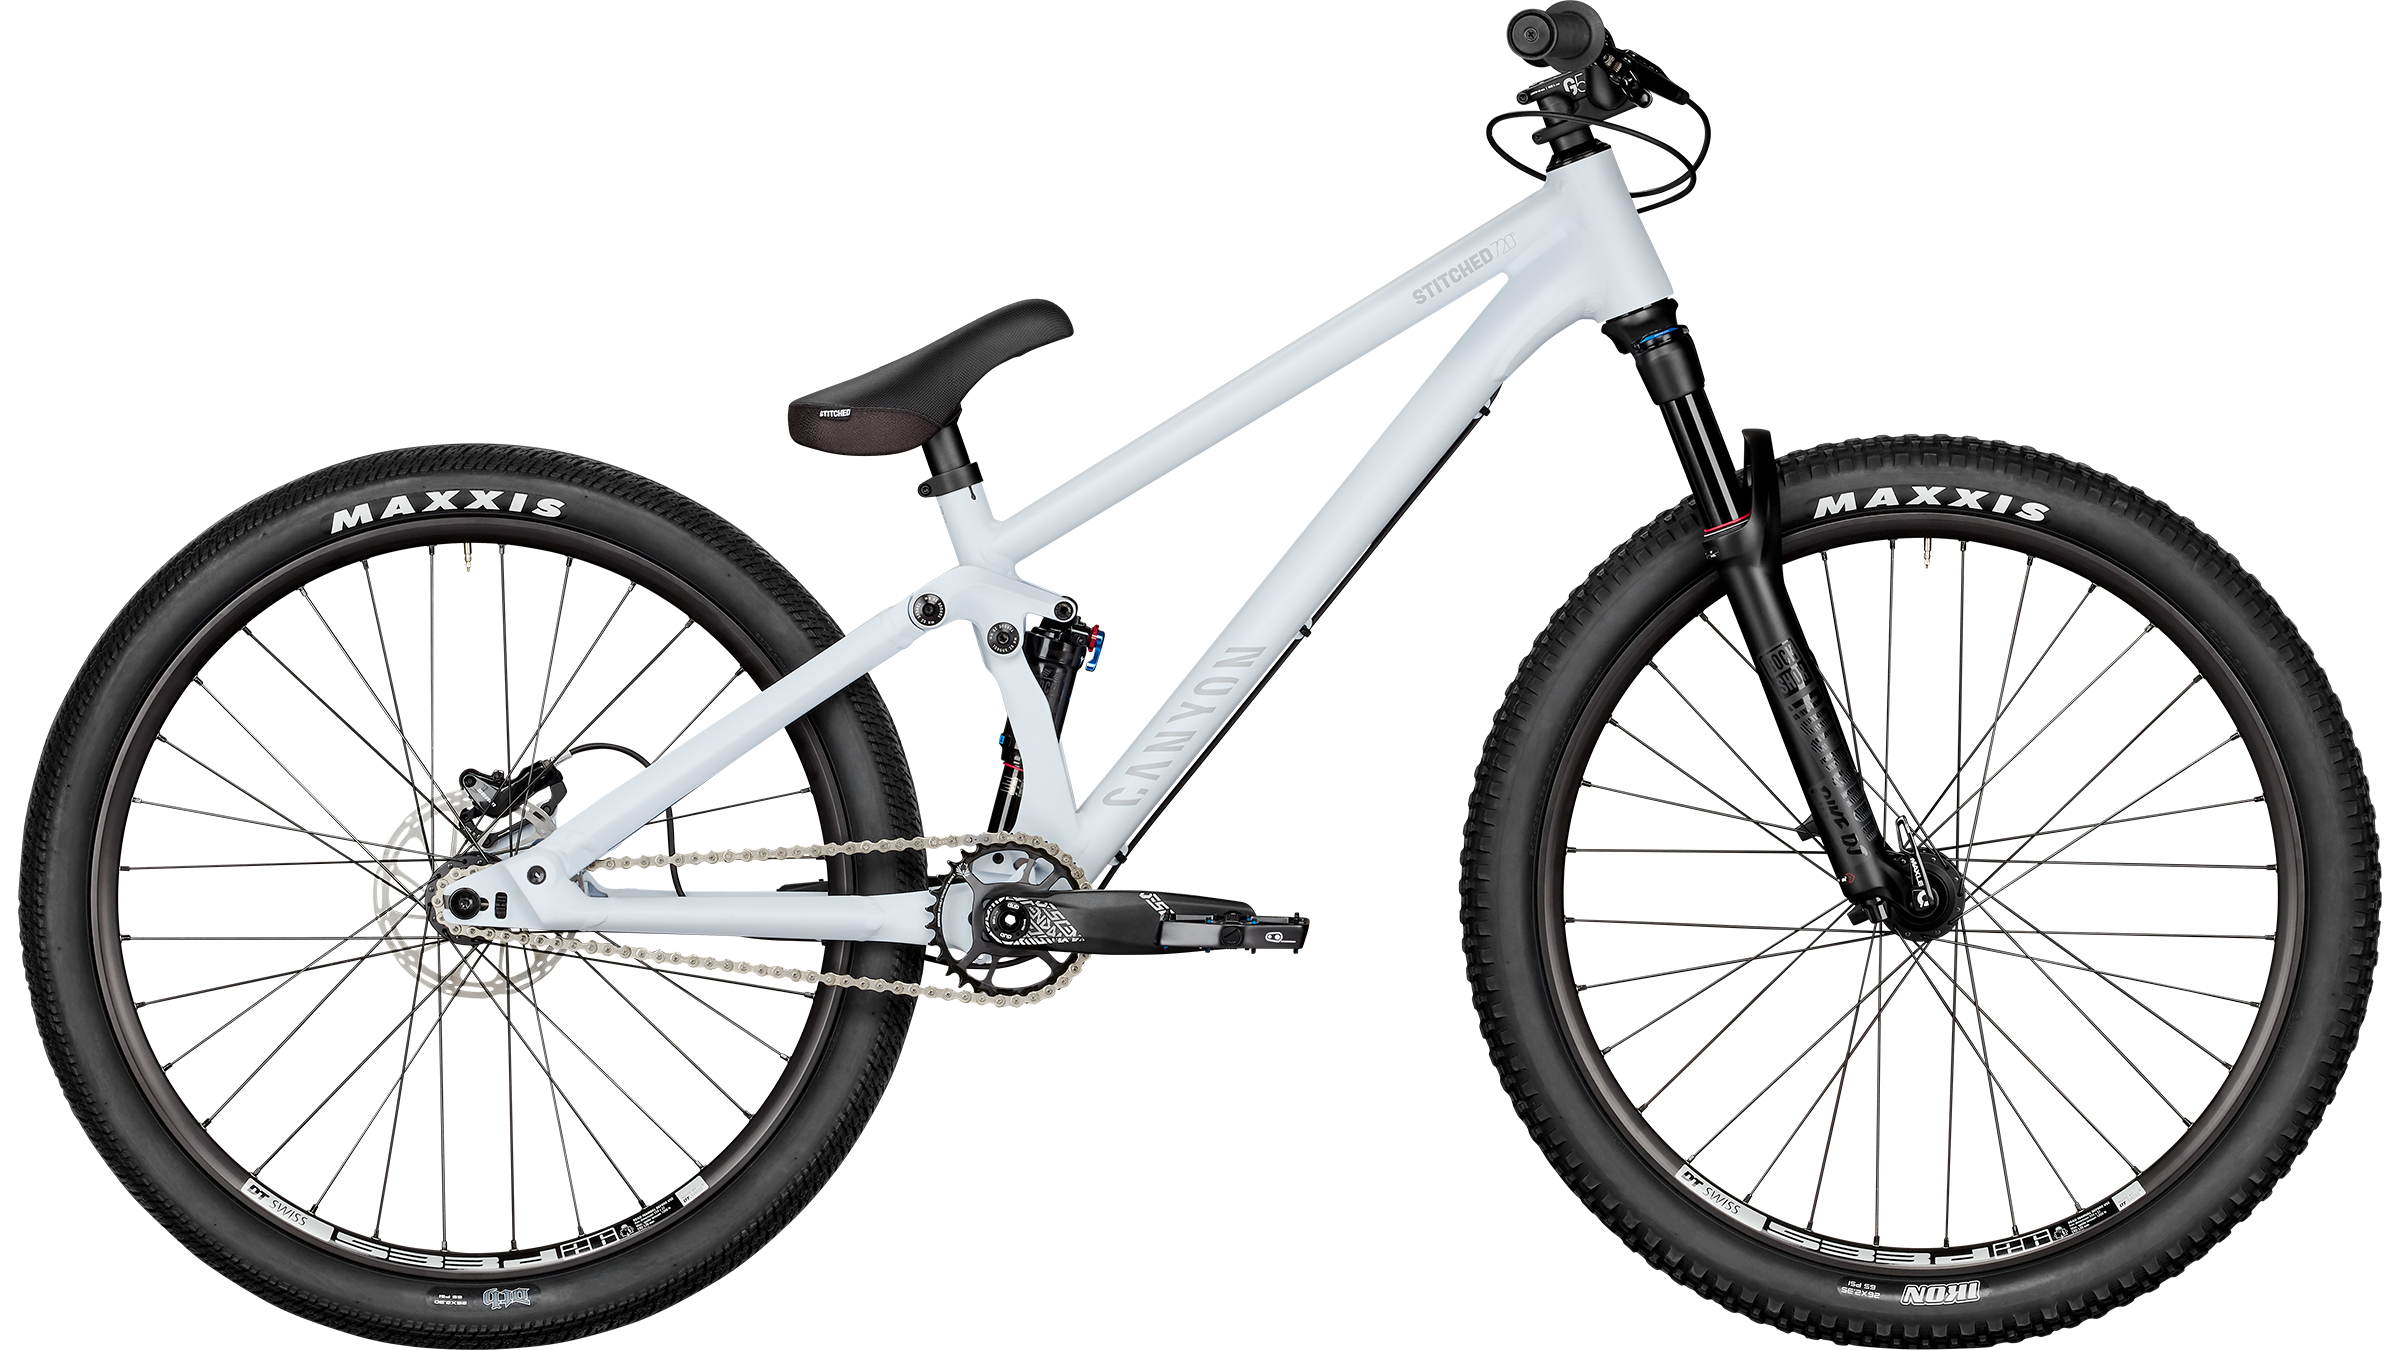 canyon stitched 720 frame